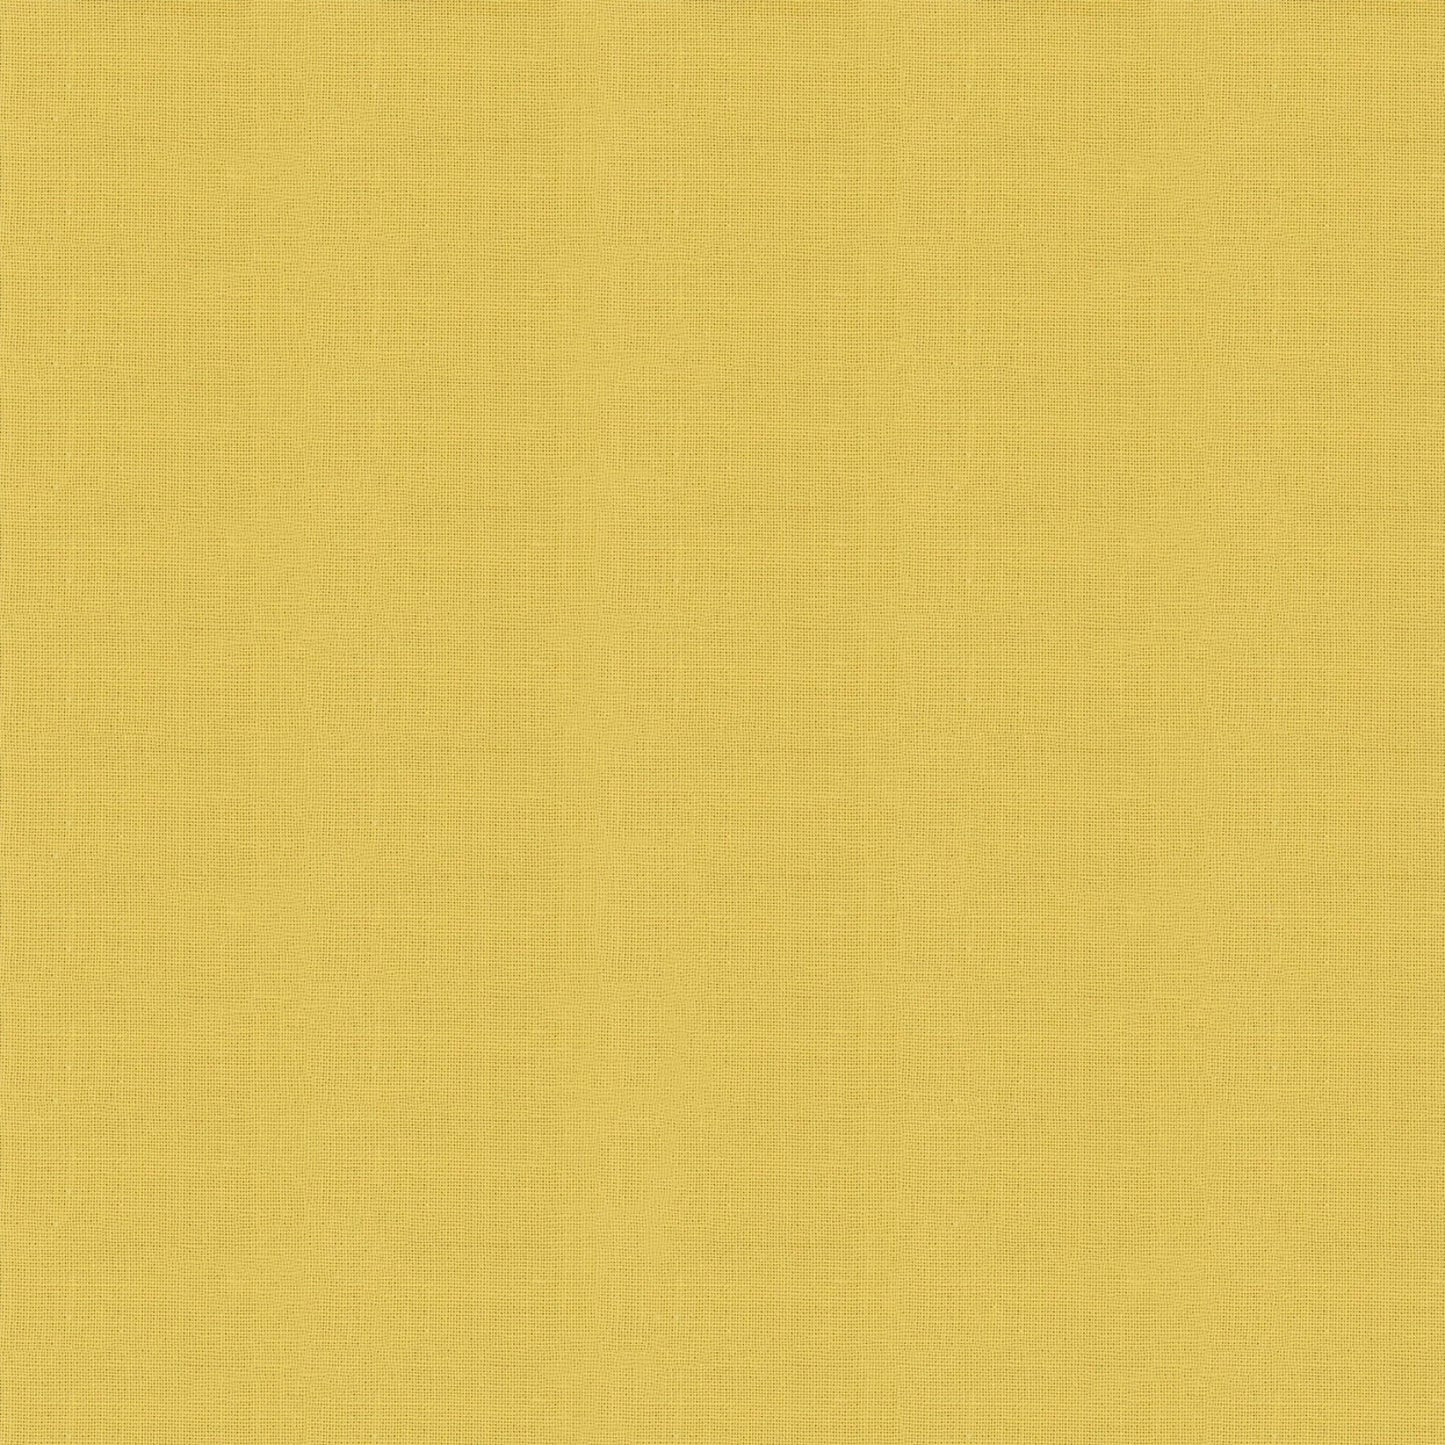 Silky Cotton Solids Japanese Quilting Fabric - Light Mustard